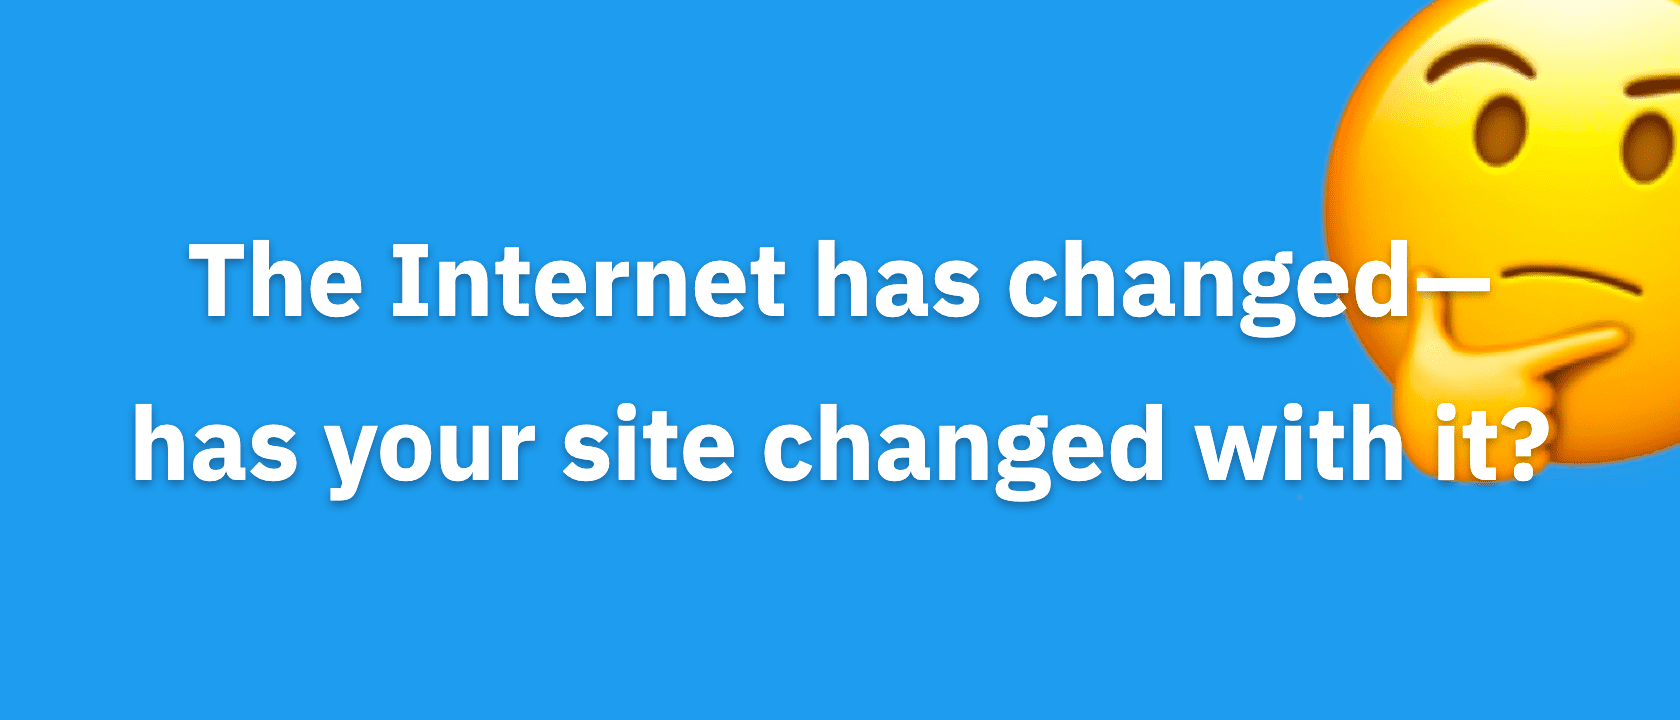 The Internet has changed—has your site changed with it?